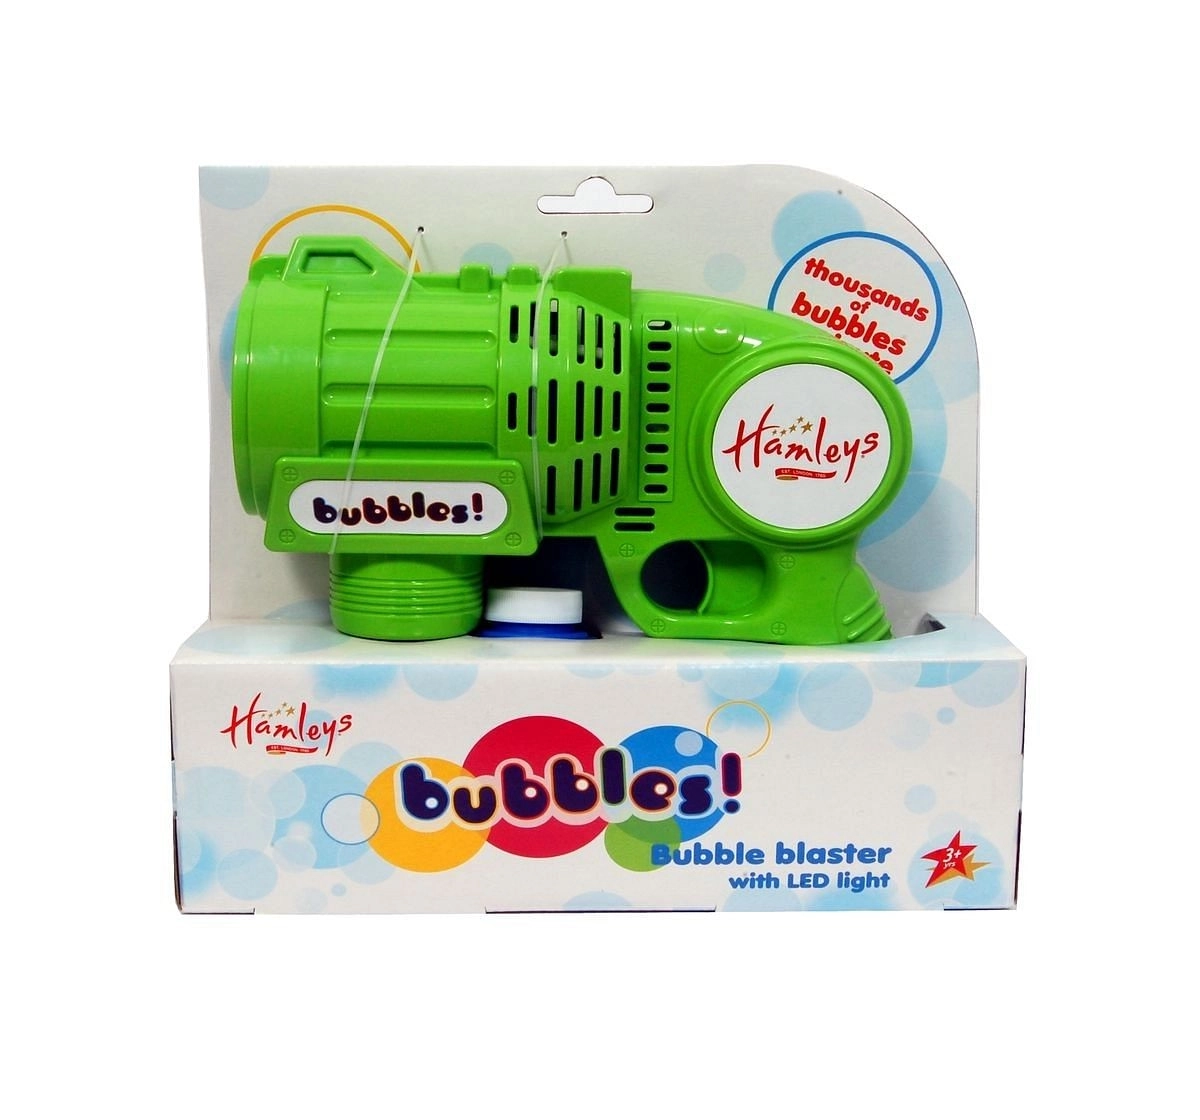 Hamleys Bubble Blaster With LED Light & 110 ml Bubble Solution Impulse Toys for Kids Green 3Y+